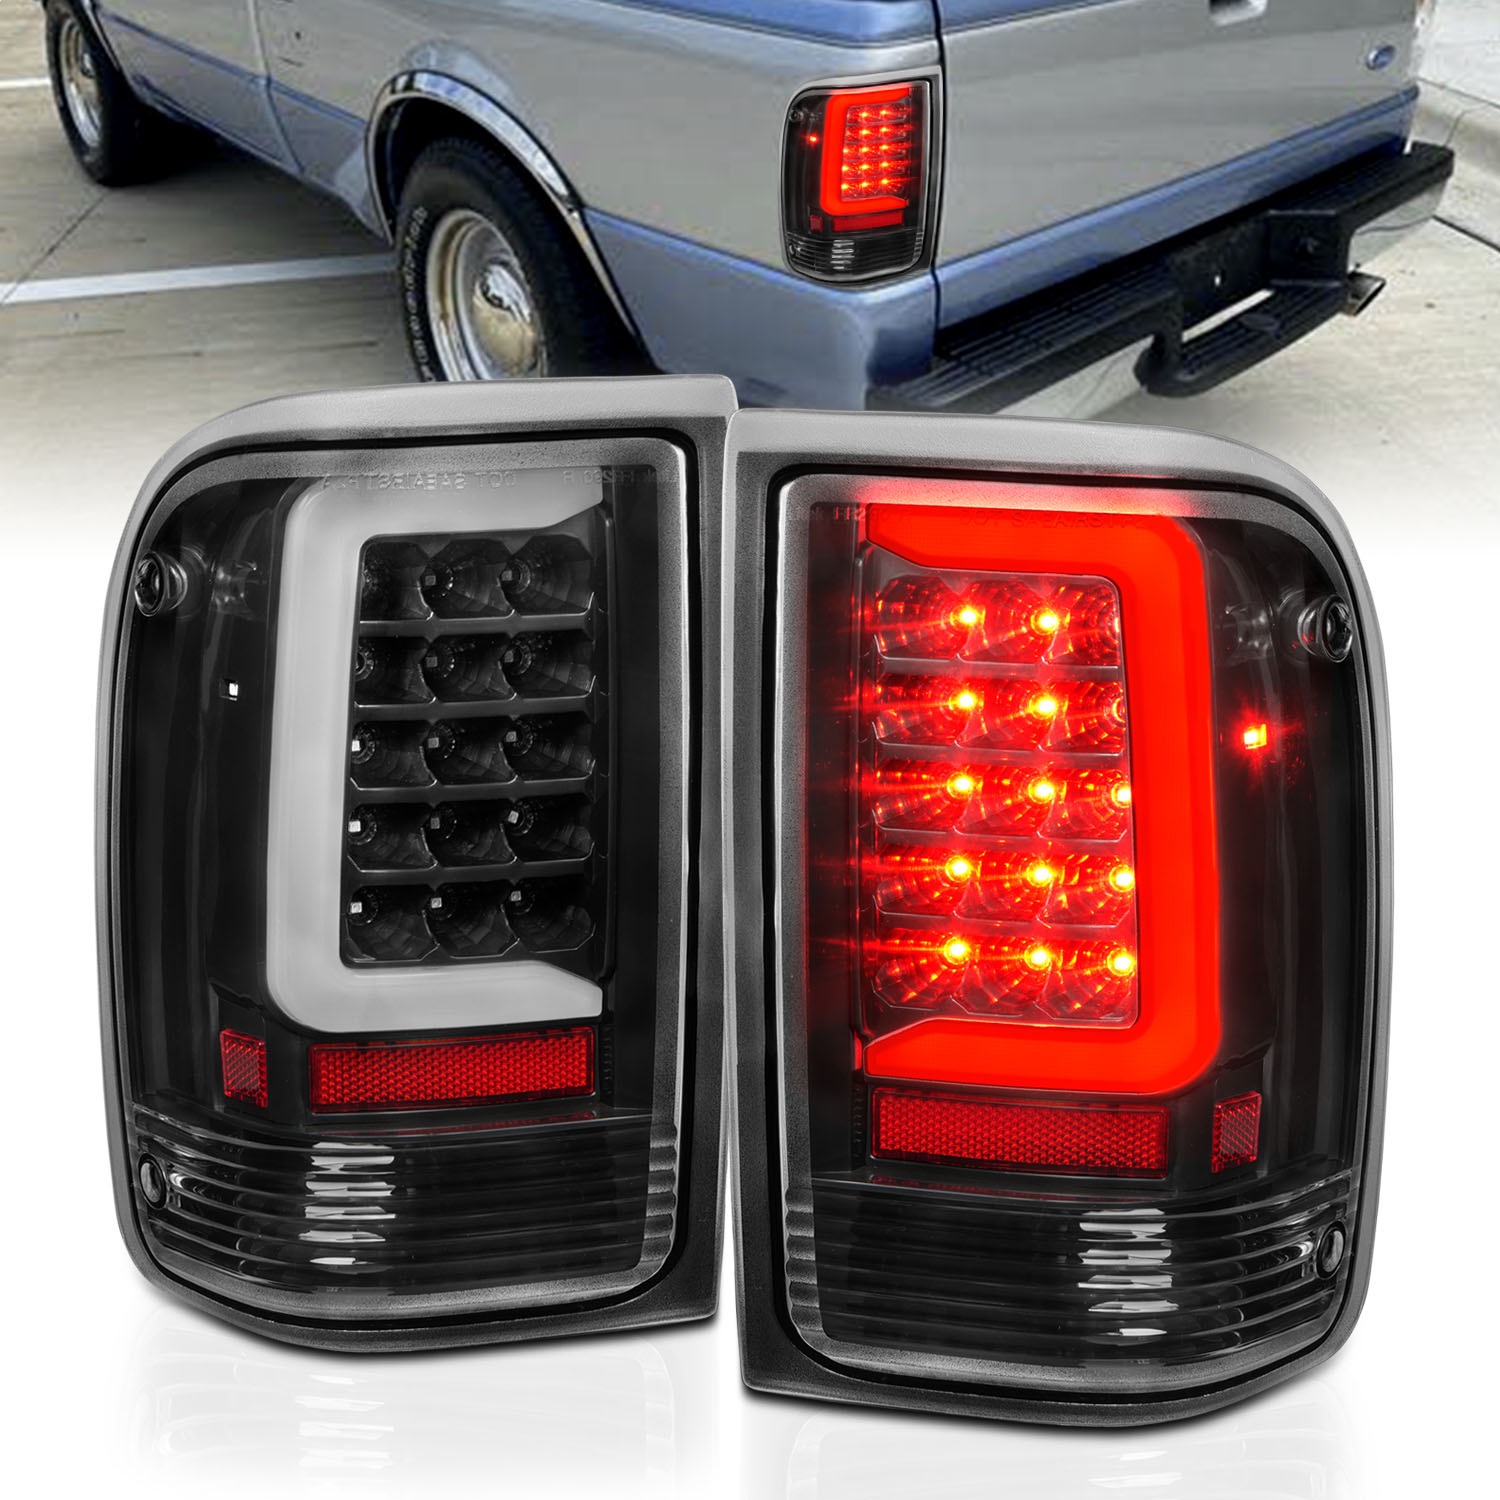 Anzo USA 311359 Tail Light Assembly Fits 93-97 Ranger